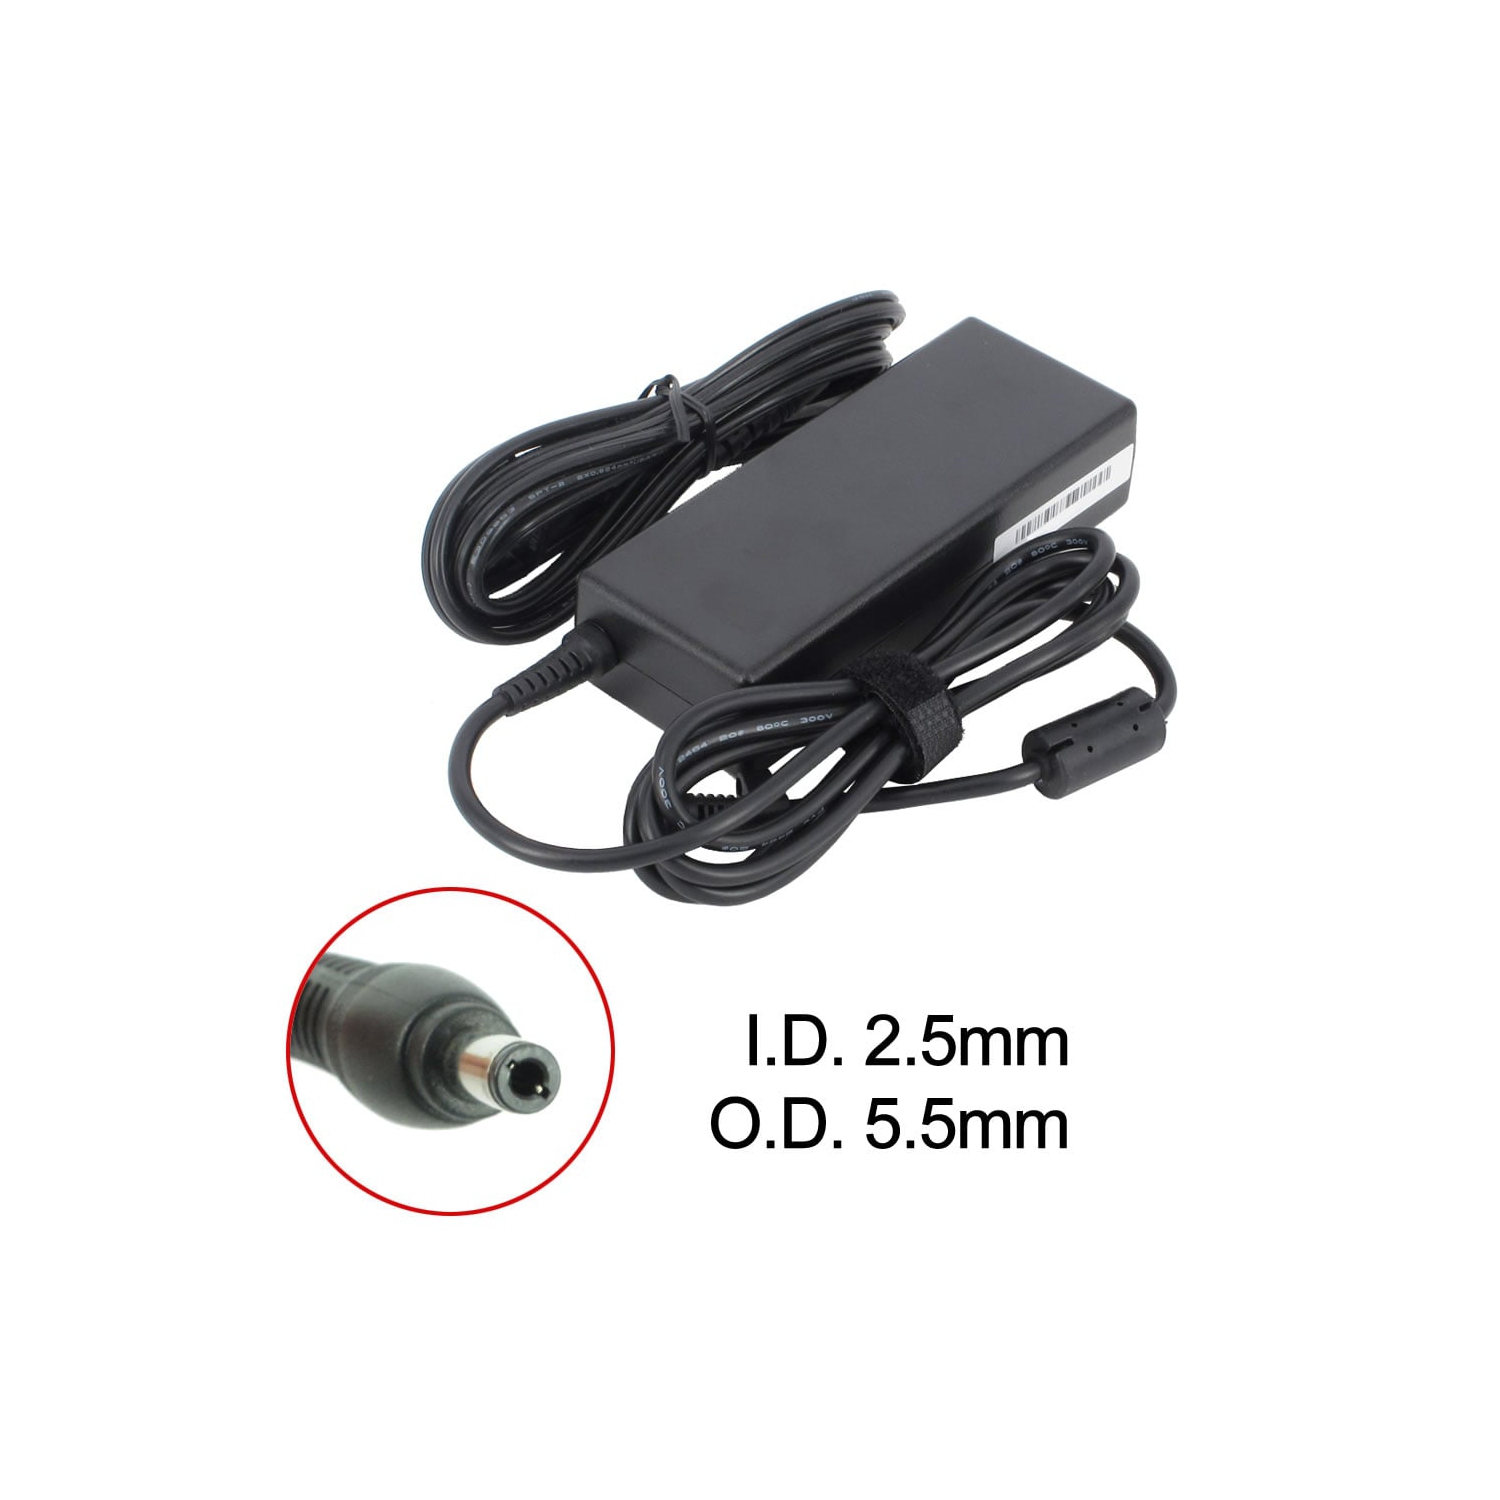 BATTDEPOT New Laptop AC Adapter for NEC LC500/2D 103942 808-875692-010A 9T458 ADP-65 HB BBEF PA-1900-36 SA80-3115